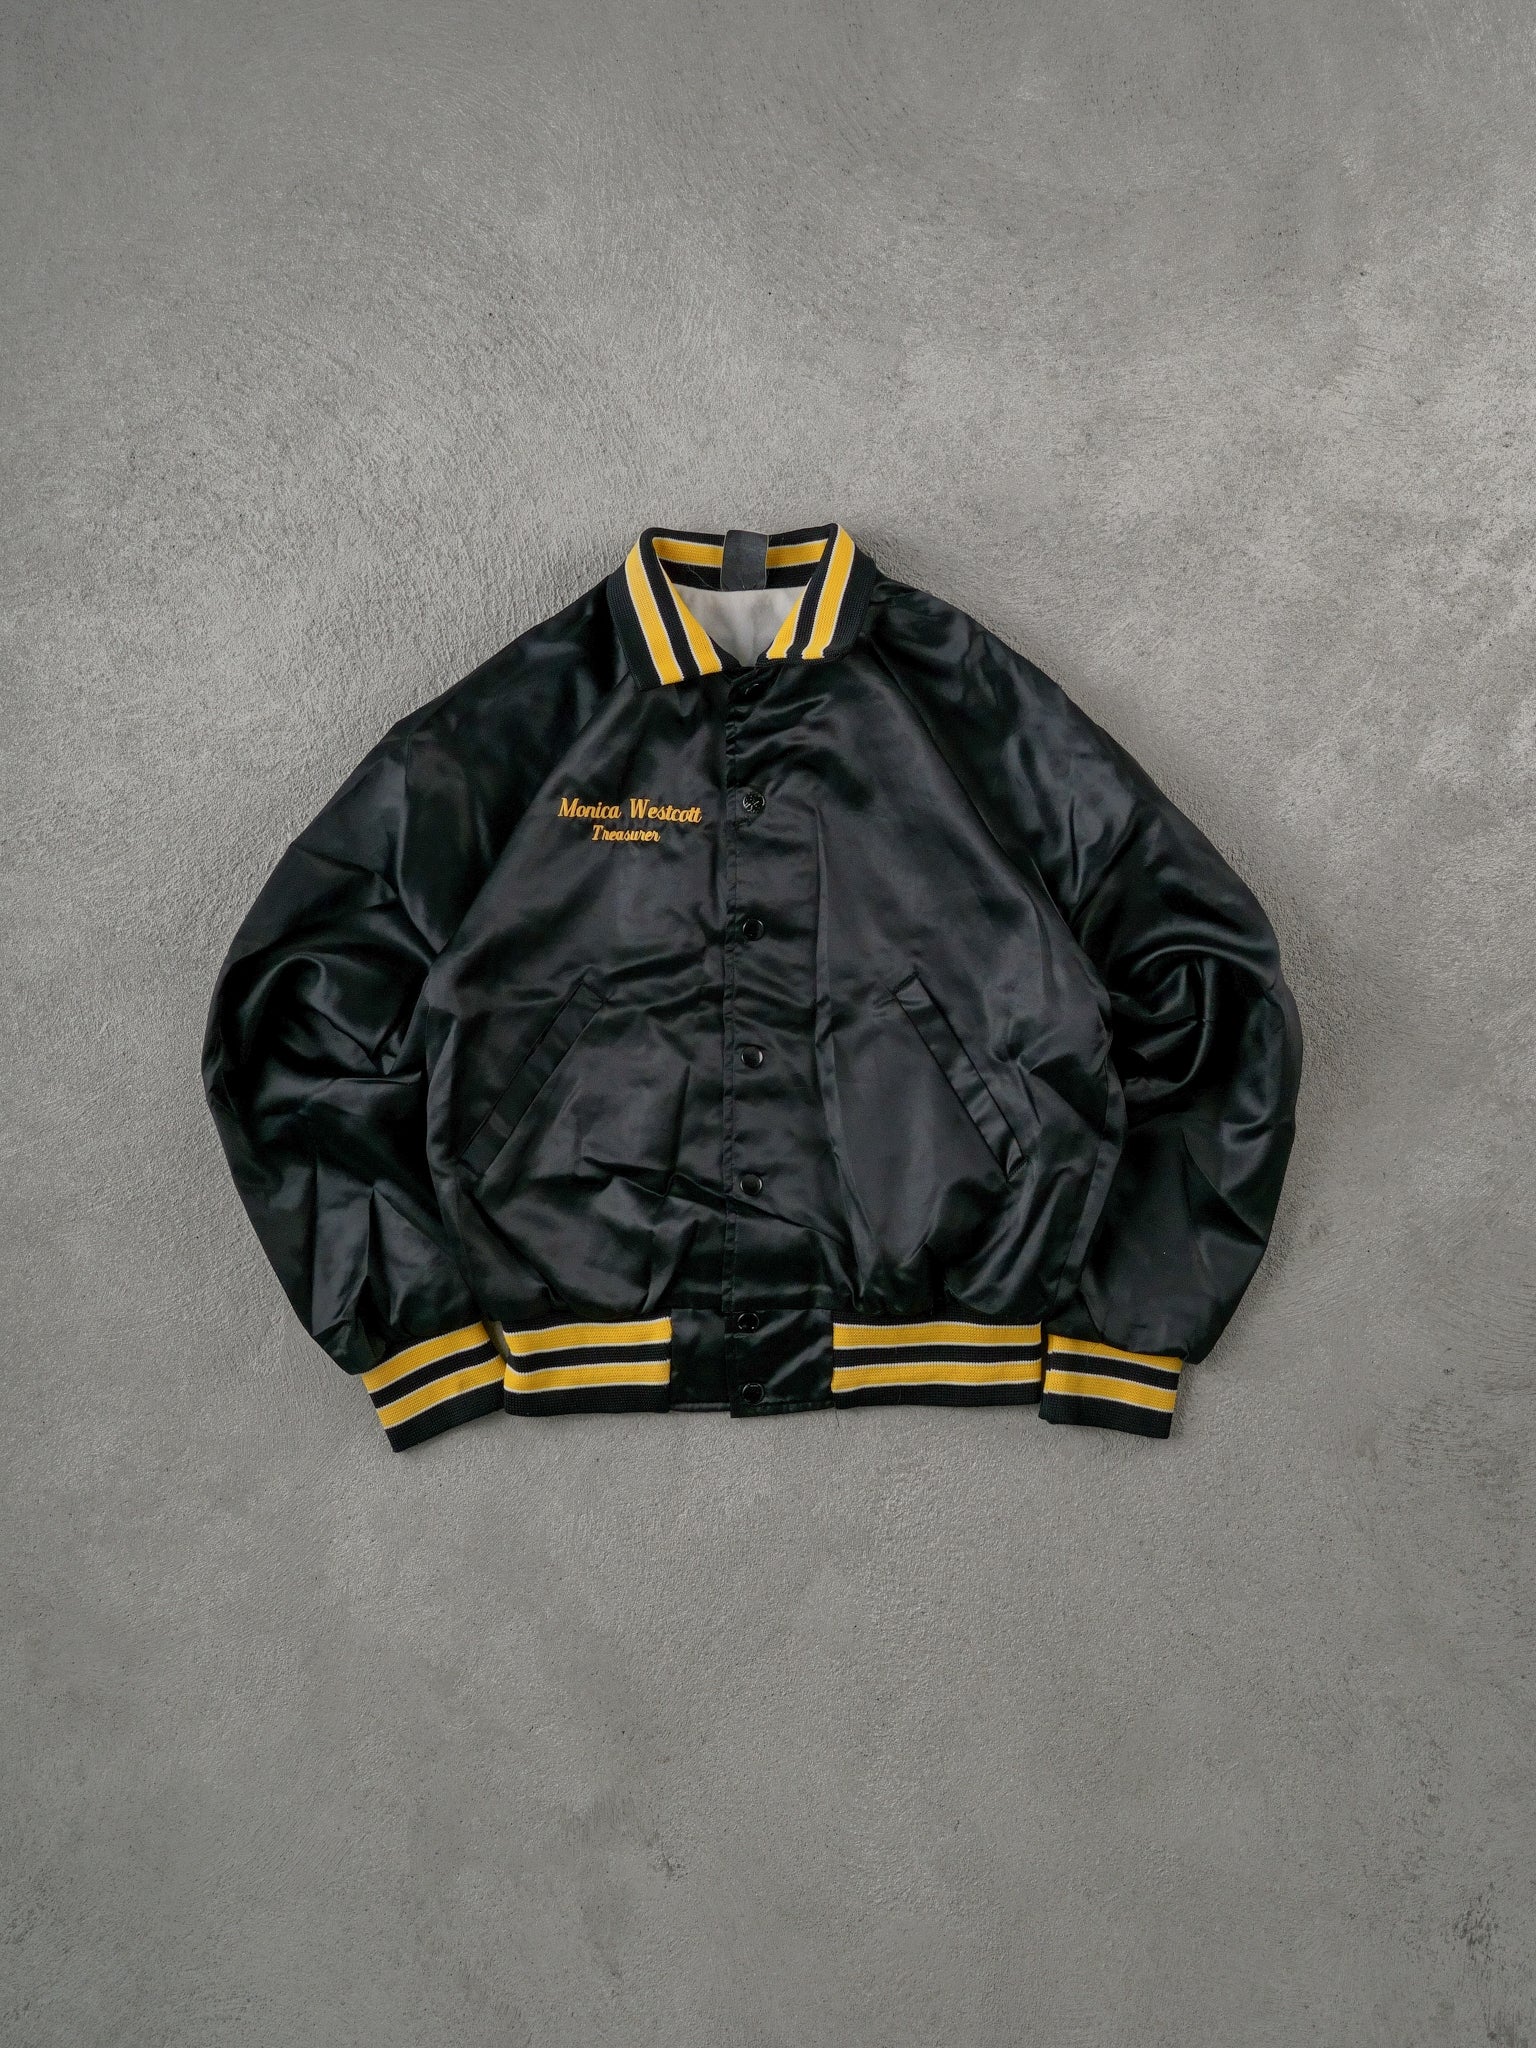 Vintage 90s Black and Yellow Auto Technology Skill Centre Texas Bomber Jacket (S/M)